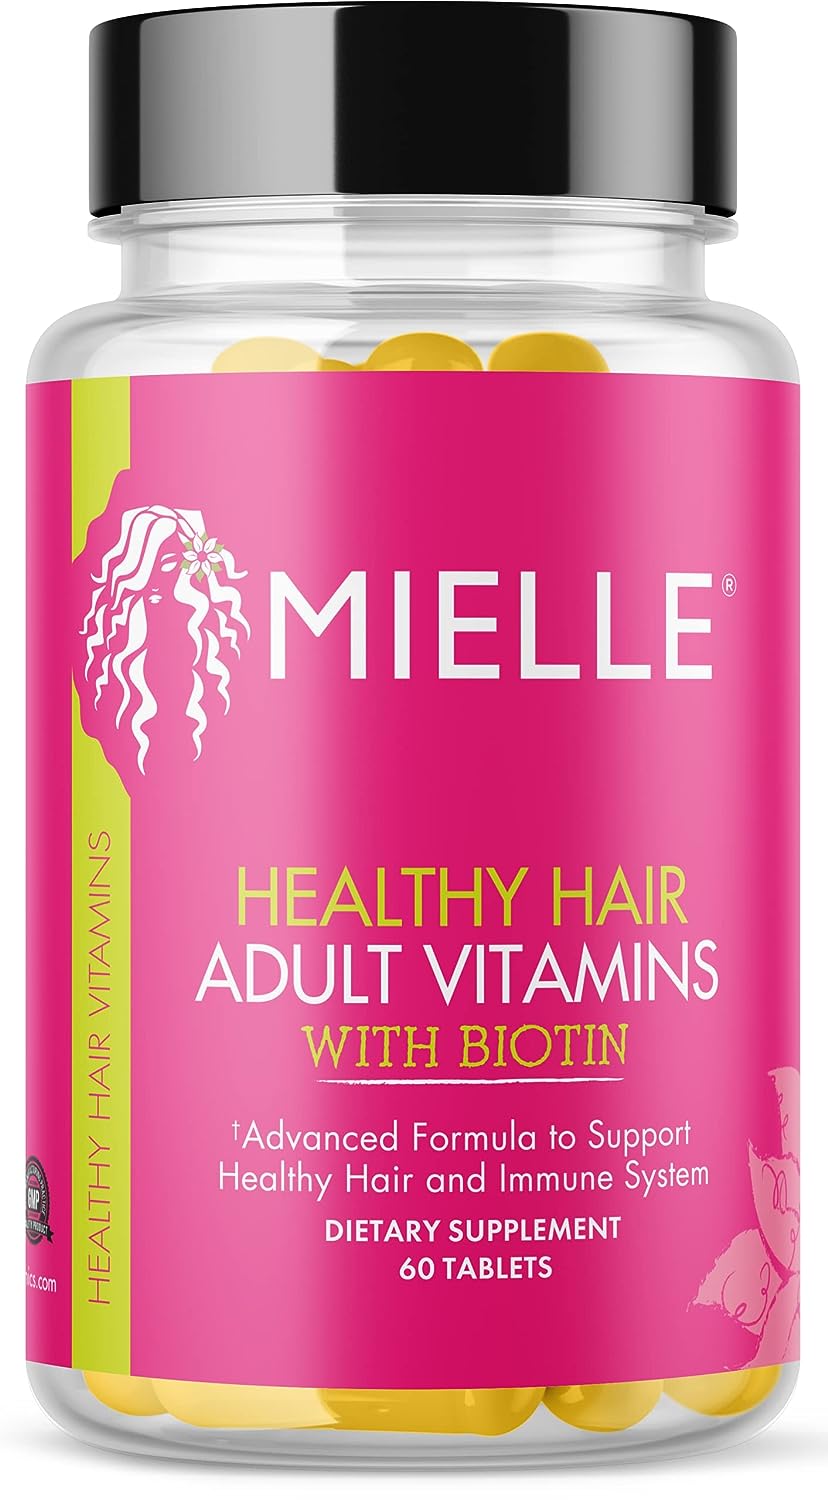 Mielle Healthy Hair Adult Vitamins With Biotin 60 Tablets